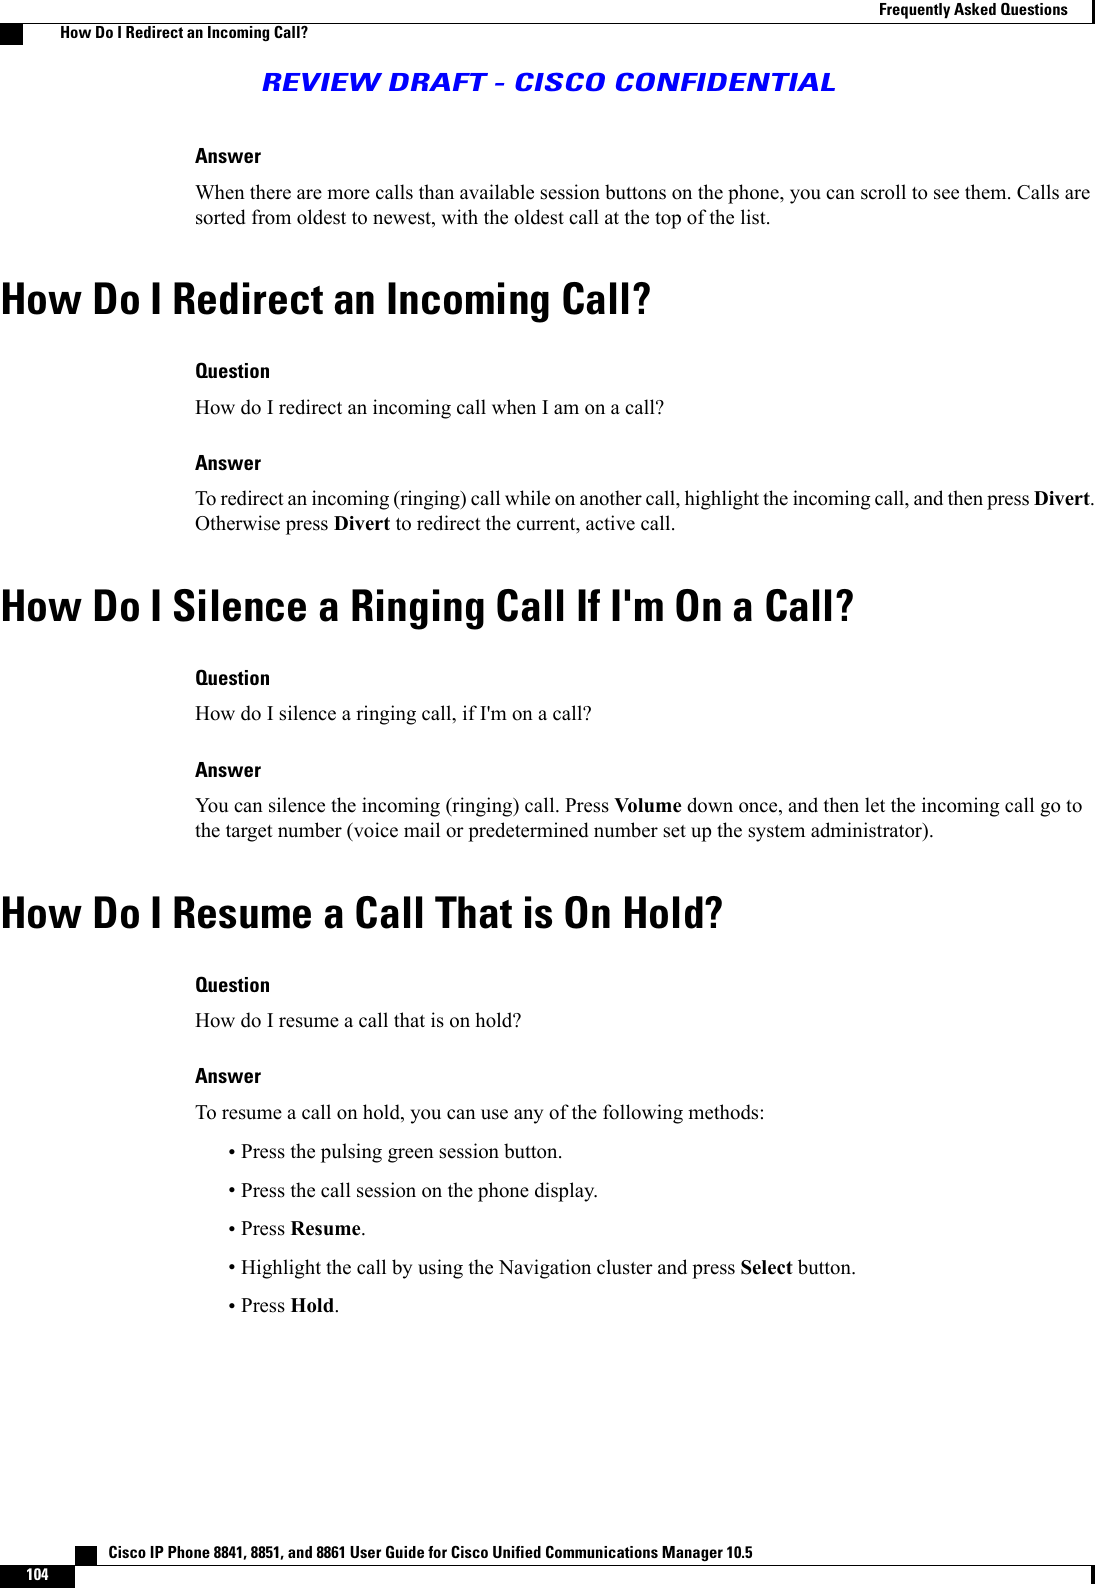 AnswerWhen there are more calls than available session buttons on the phone, you can scroll to see them. Calls aresorted from oldest to newest, with the oldest call at the top of the list.How Do I Redirect an Incoming Call?QuestionHow do I redirect an incoming call when I am on a call?AnswerTo redirect an incoming (ringing) call while on another call, highlight the incoming call, and then press Divert.Otherwise press Divert to redirect the current, active call.How Do I Silence a Ringing Call If I&apos;m On a Call?QuestionHow do I silence a ringing call, if I&apos;m on a call?AnswerYou can silence the incoming (ringing) call. Press Volume down once, and then let the incoming call go tothe target number (voice mail or predetermined number set up the system administrator).How Do I Resume a Call That is On Hold?QuestionHow do I resume a call that is on hold?AnswerTo resume a call on hold, you can use any of the following methods:•Press the pulsing green session button.•Press the call session on the phone display.•Press Resume.•Highlight the call by using the Navigation cluster and press Select button.•Press Hold.   Cisco IP Phone 8841, 8851, and 8861 User Guide for Cisco Unified Communications Manager 10.5104Frequently Asked QuestionsHow Do I Redirect an Incoming Call?REVIEW DRAFT - CISCO CONFIDENTIAL